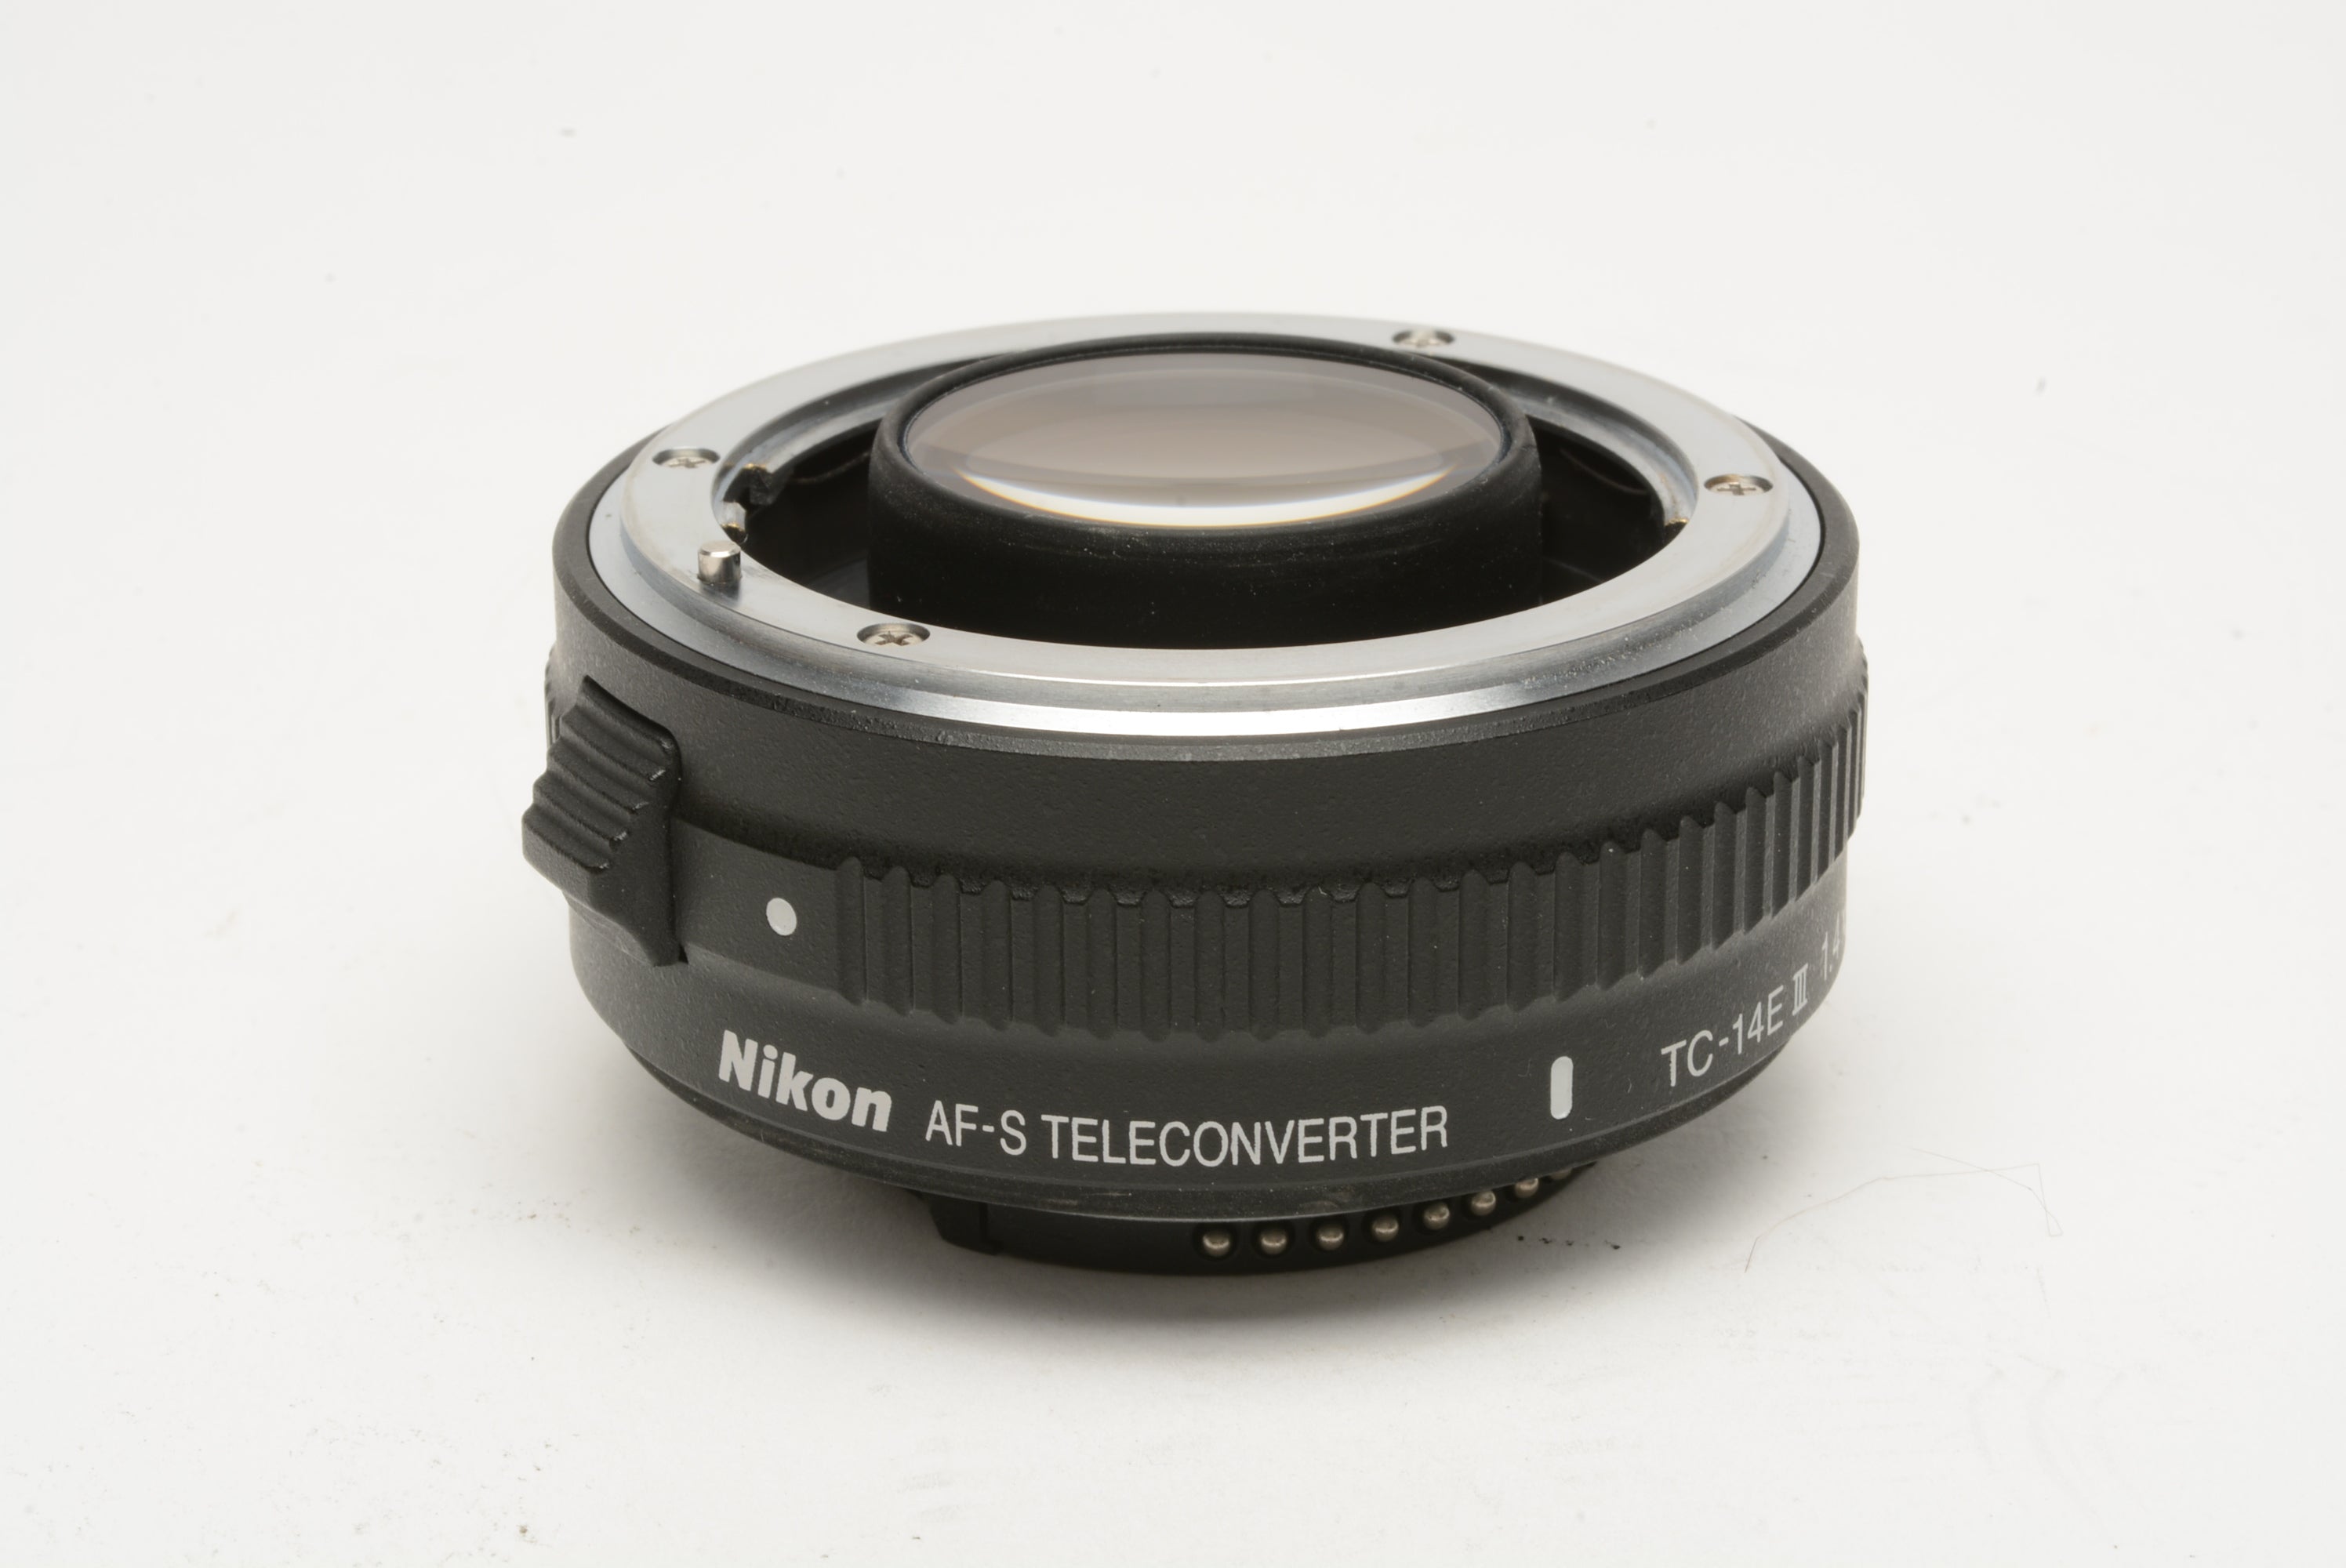 Nikon TC-14E III AF-S 1.4X Teleconverter, very clean, barely used 